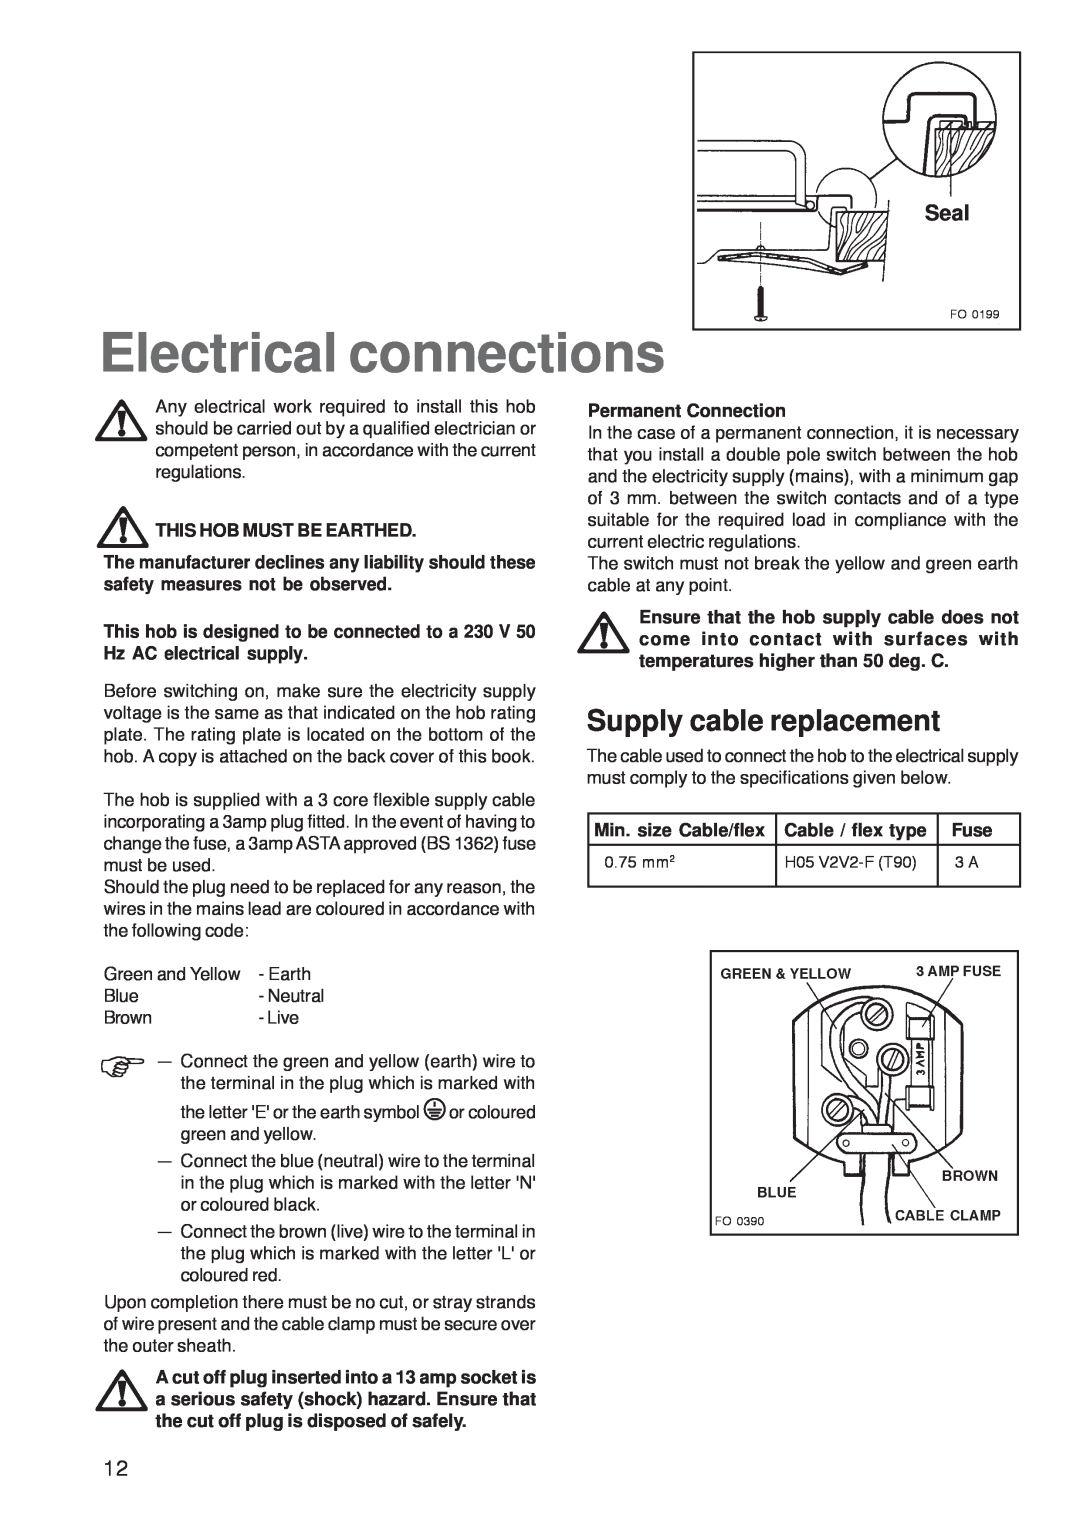 Zanussi ZGF 782 CTN Electrical connections, Supply cable replacement, aSeal, This Hob Must Be Earthed, Cable / flex type 